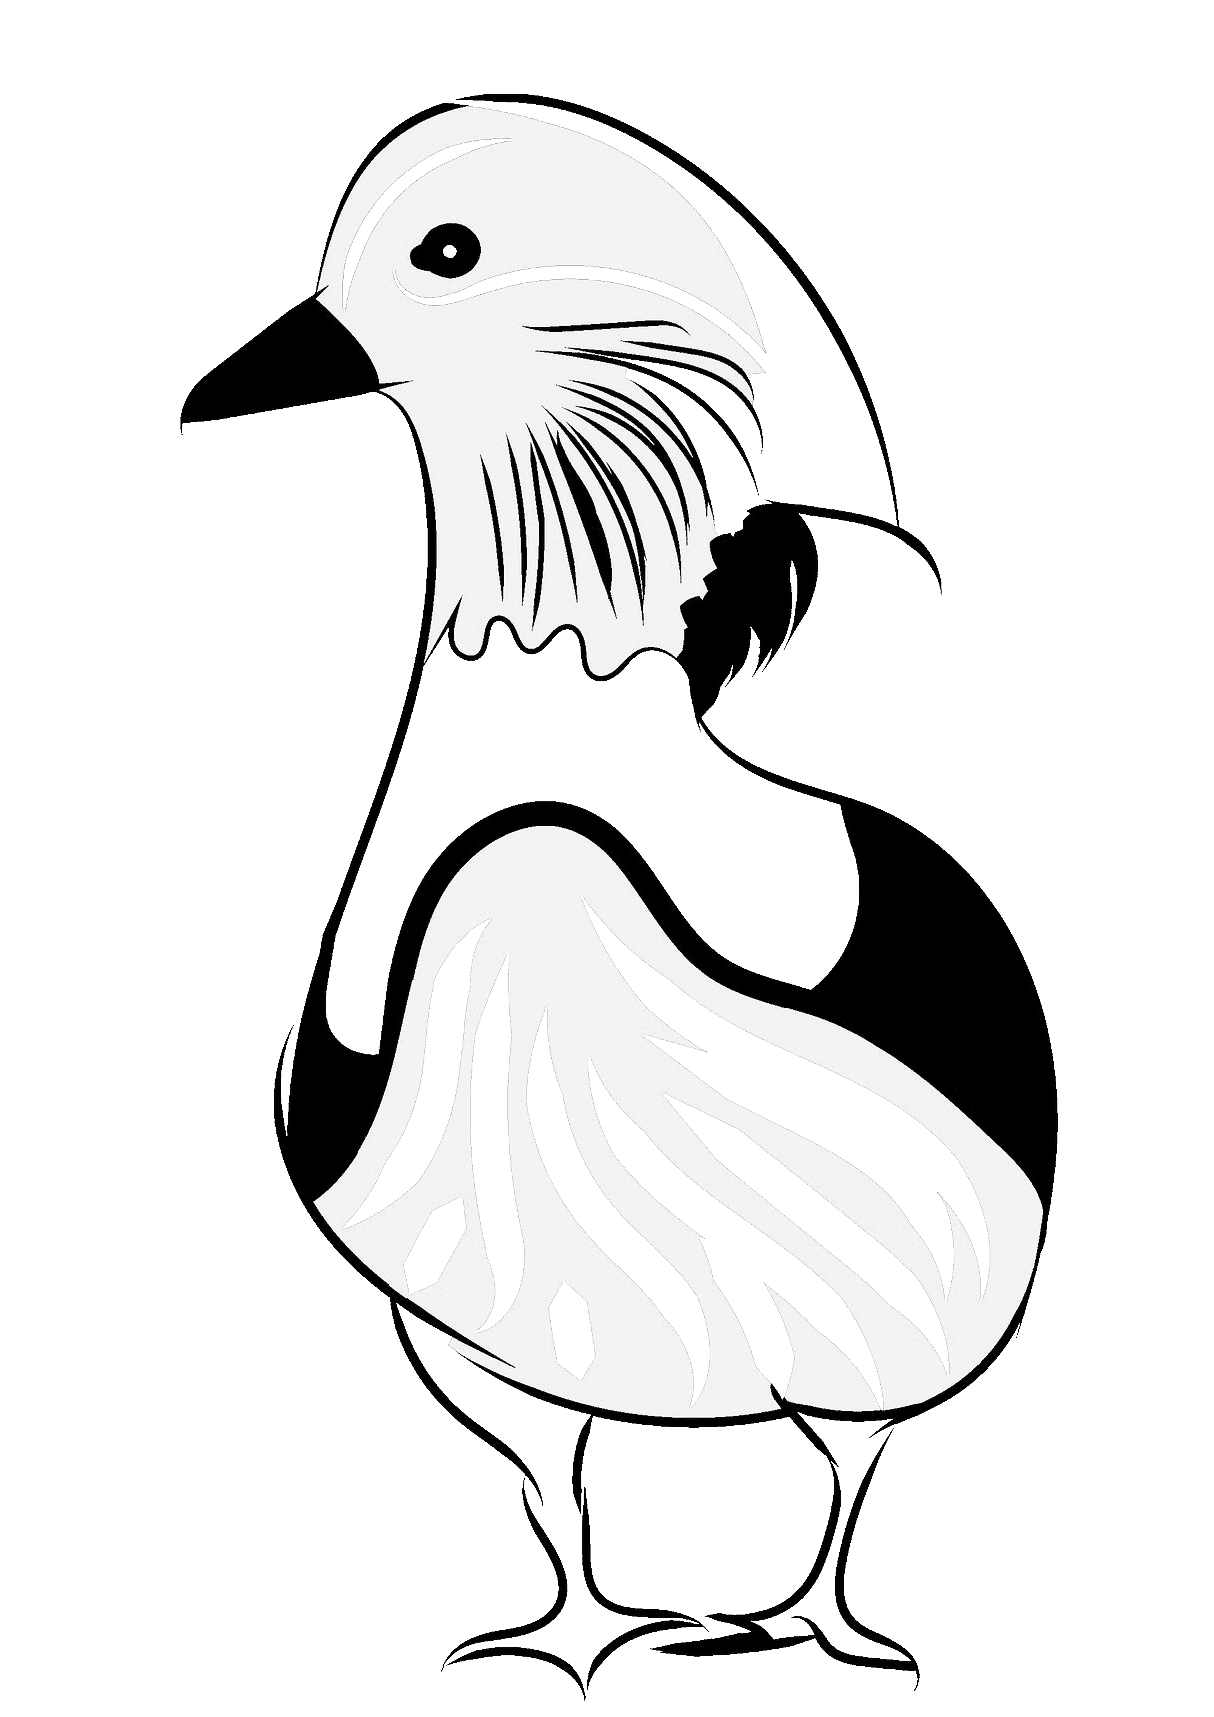 Mandarin duck has distinctive long feathers on the side of the face Coloring Pages